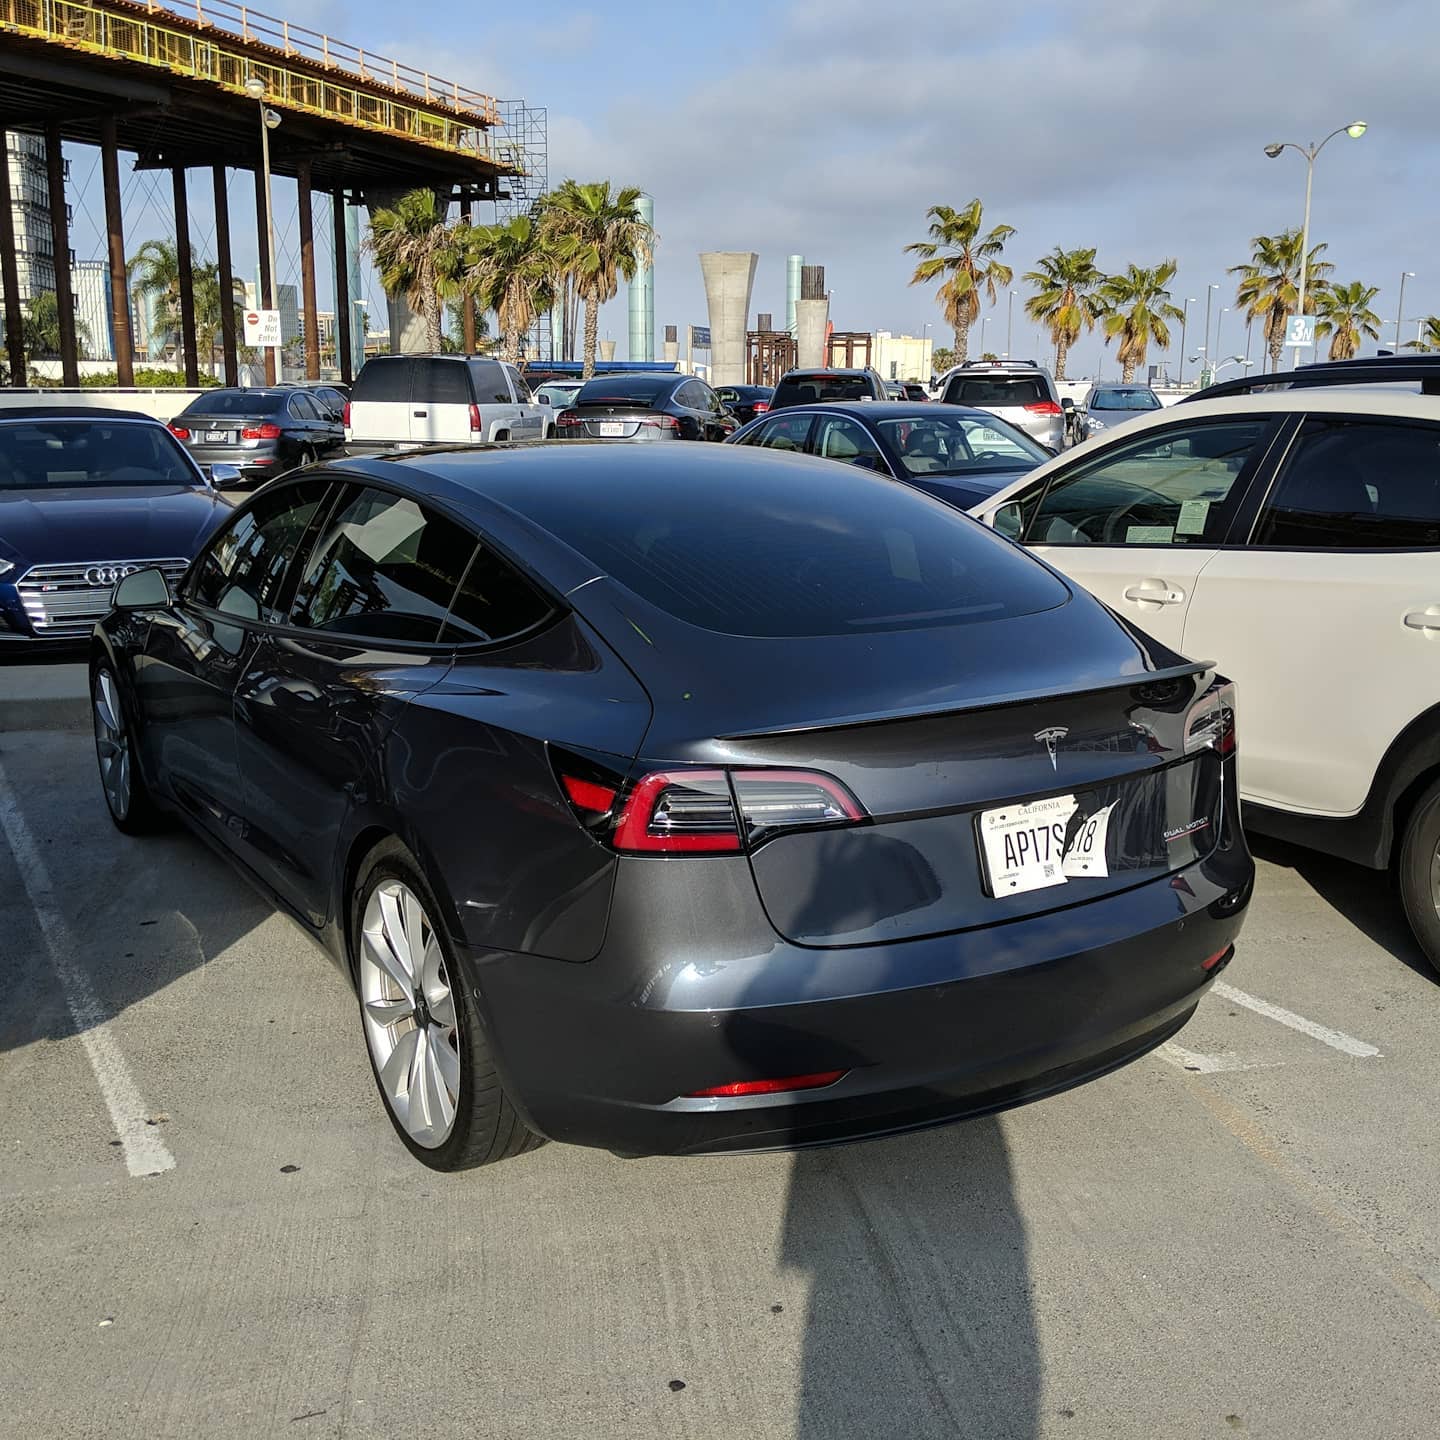 Guess what I'm driving this week in California? #tesla #model3performance #turo